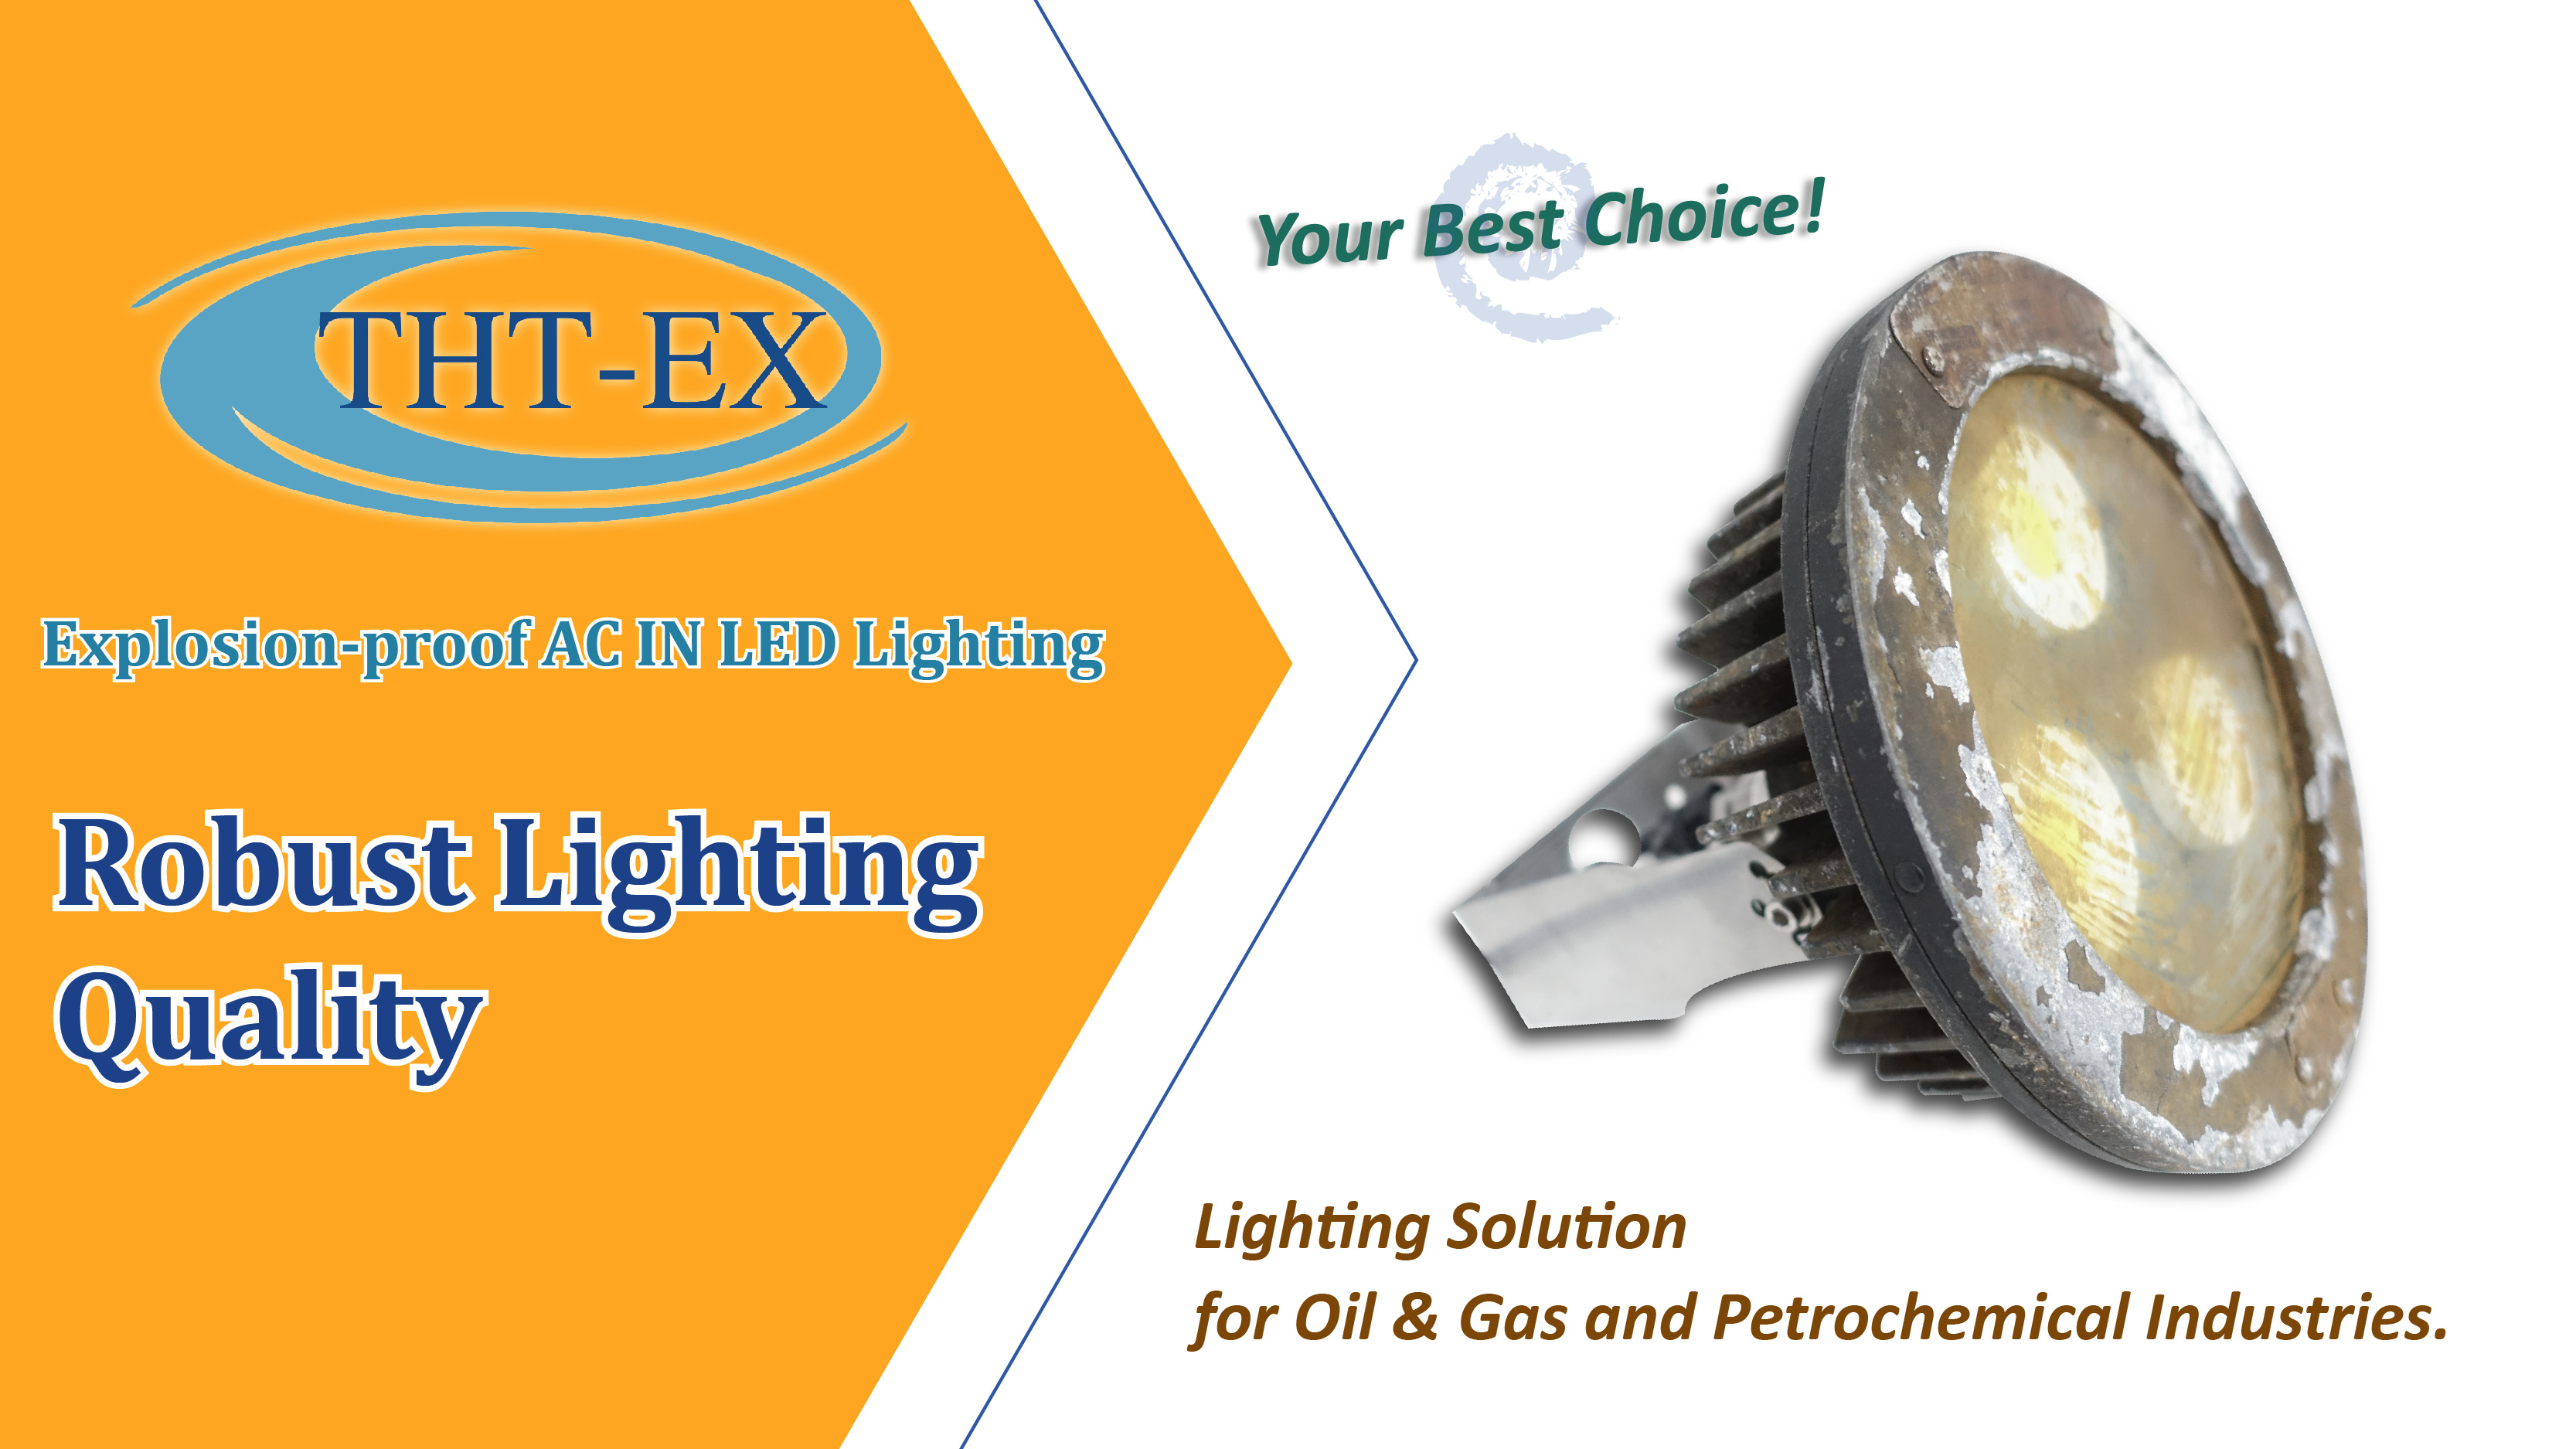 Robust Explosion-proof LED Lighting Quality. Lighting Solution for Oil & Gas and Petrochemical Plant